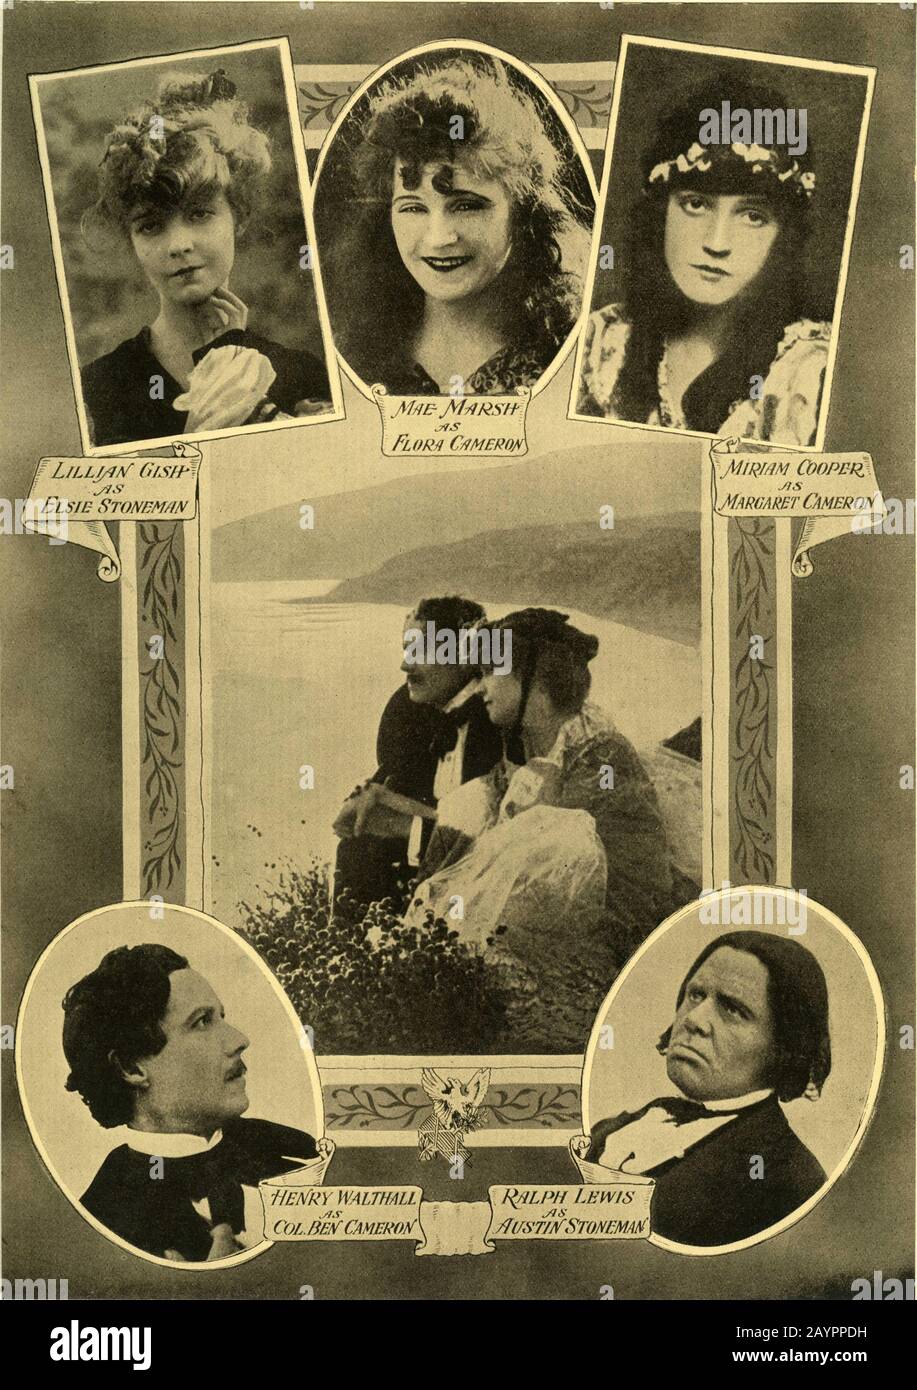 LILLIAN GISH as Elsie Stoneman MAE MARSH as Flora Cameron MIRIAM COOPER as Margaret Cameron HENRY B. WALTHALL as Colonel Ben Cameron aka The Little Colonel and RALPH LEWIS as Austin Stoneman in THE BIRTH OF A NATION 1915 director D. W. GRIFFITH novel / play The Clansman by Thomas Dixon Jr David W. Griffith Corp. / Epoch Producing Corporation Stock Photo